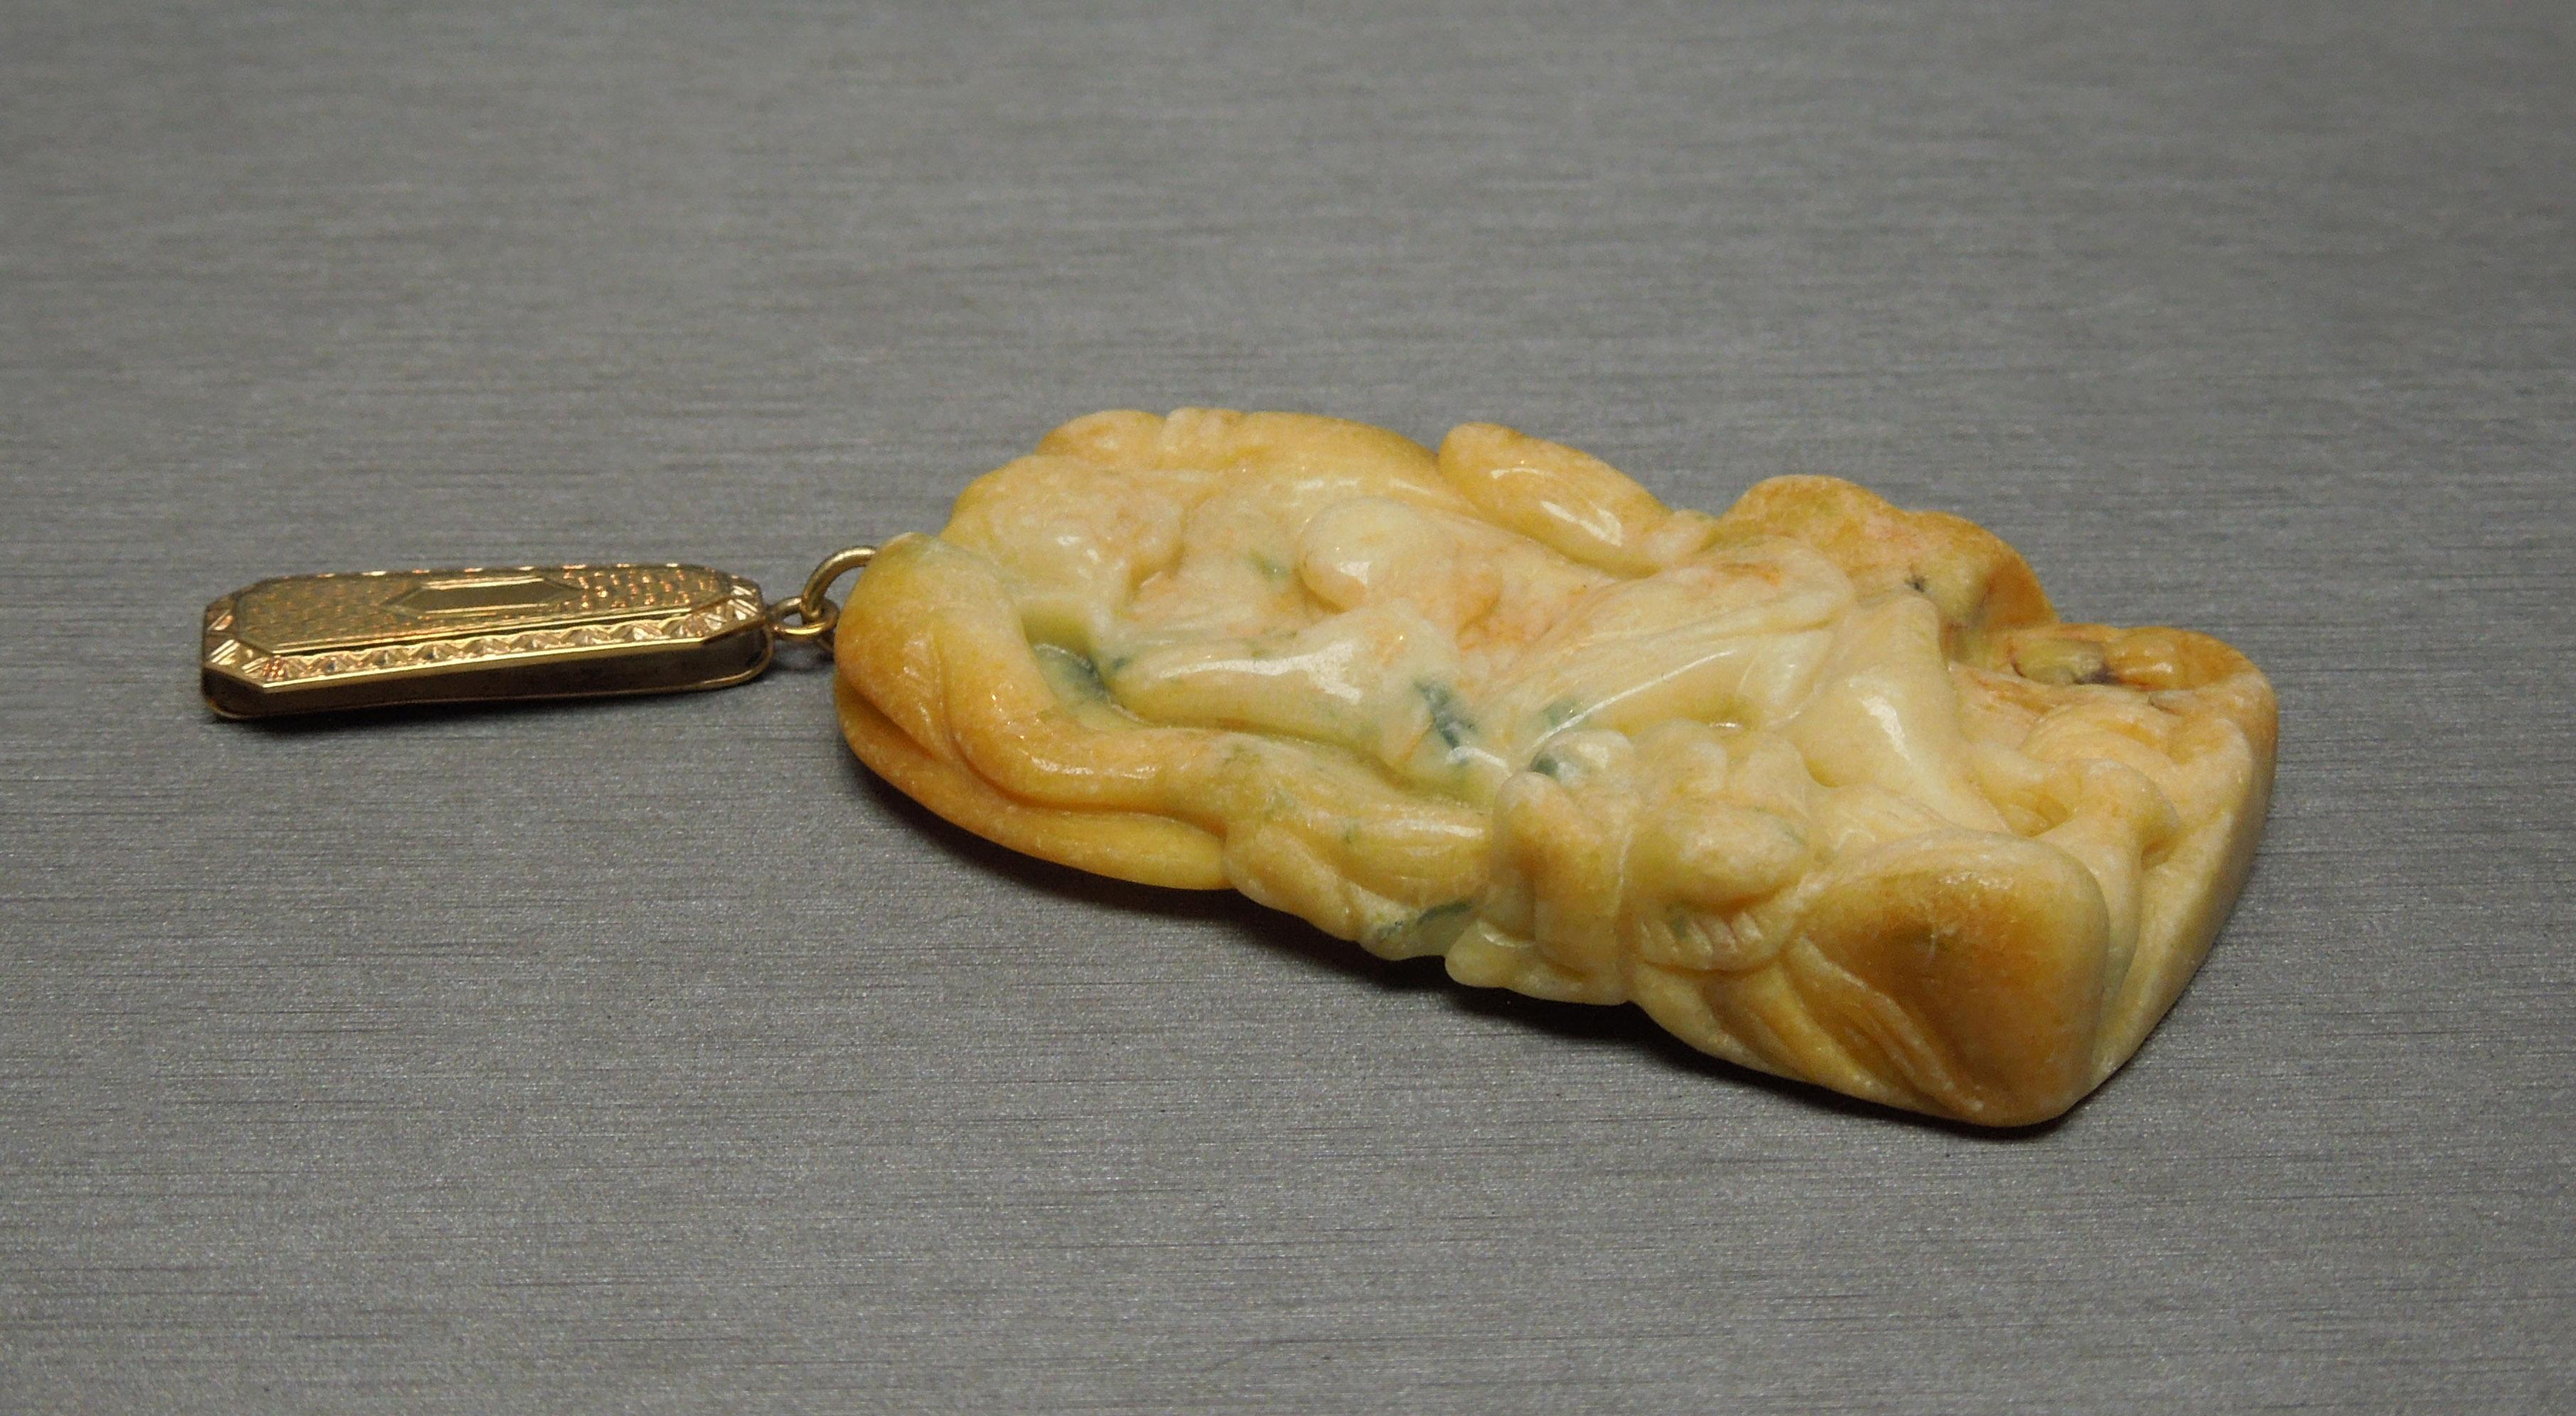 Featuring 1 Natural Banana Yellow Jade Carving (slightly variegated / variation in color throughout) measuring approximately 2.5